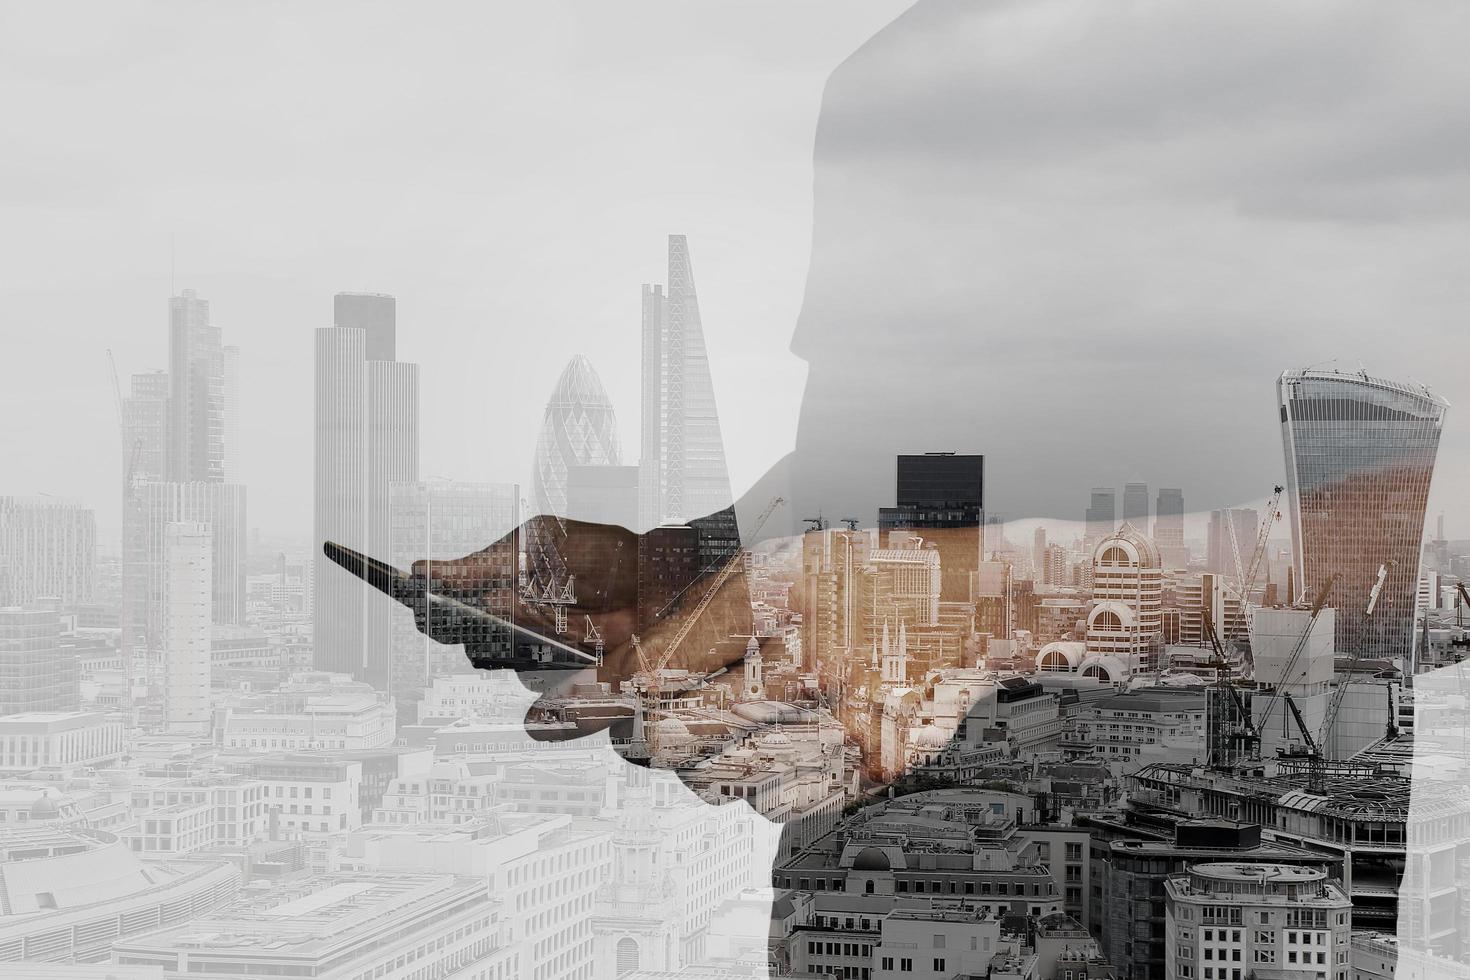 Double exposure of success businessman using digital tablet with london building and social media diagram photo